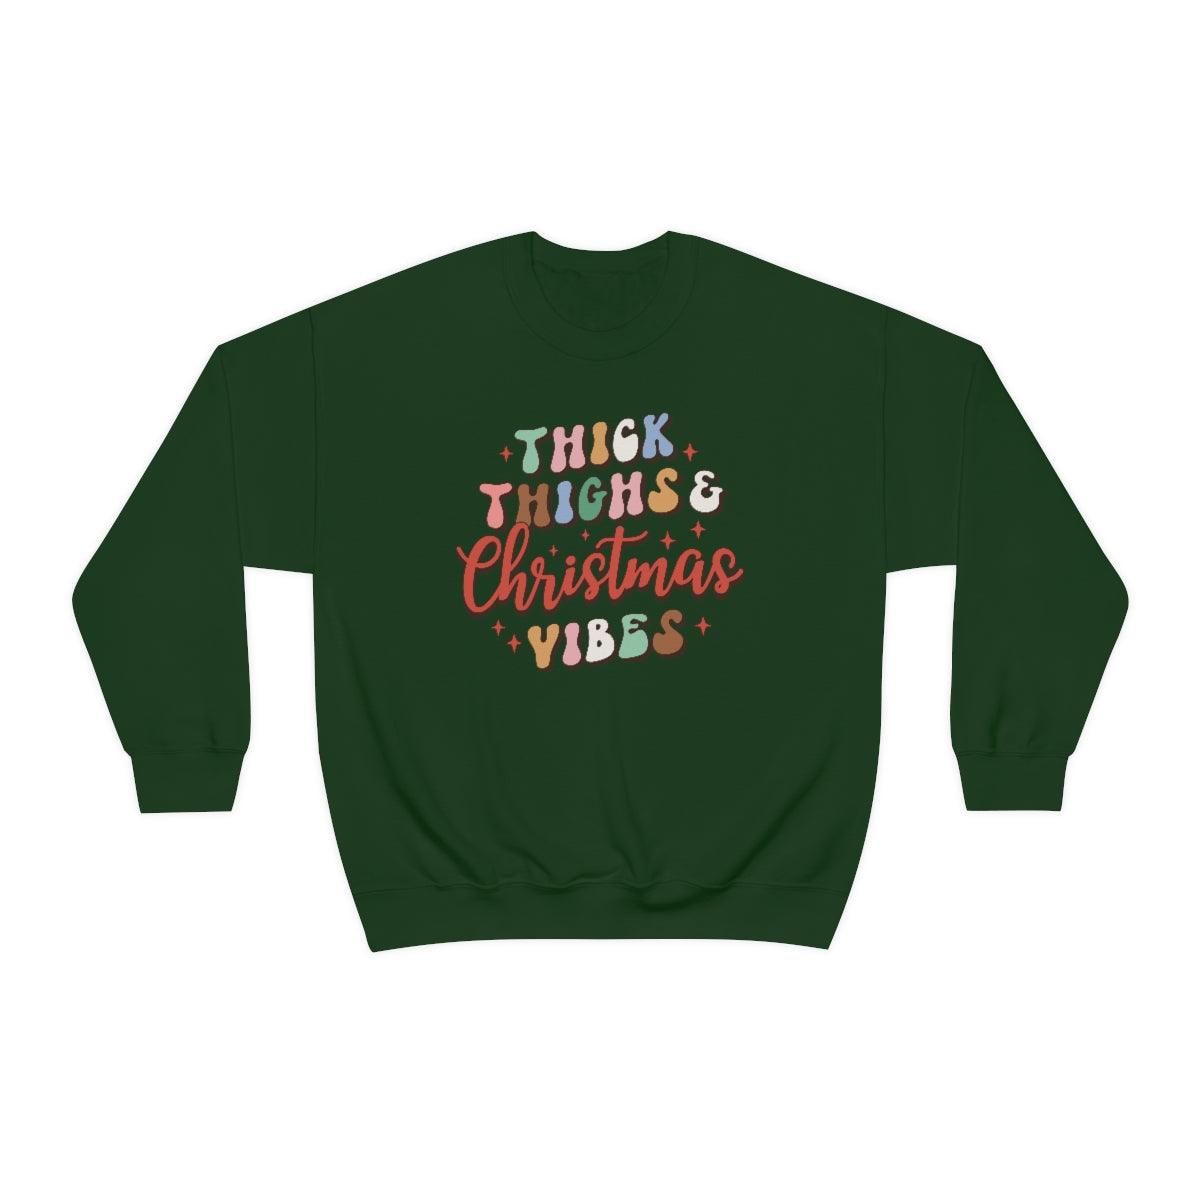 Retro Thick Thighs and Christmas Vibes Christmas Crewneck Sweater - Crystal Rose Design Co.